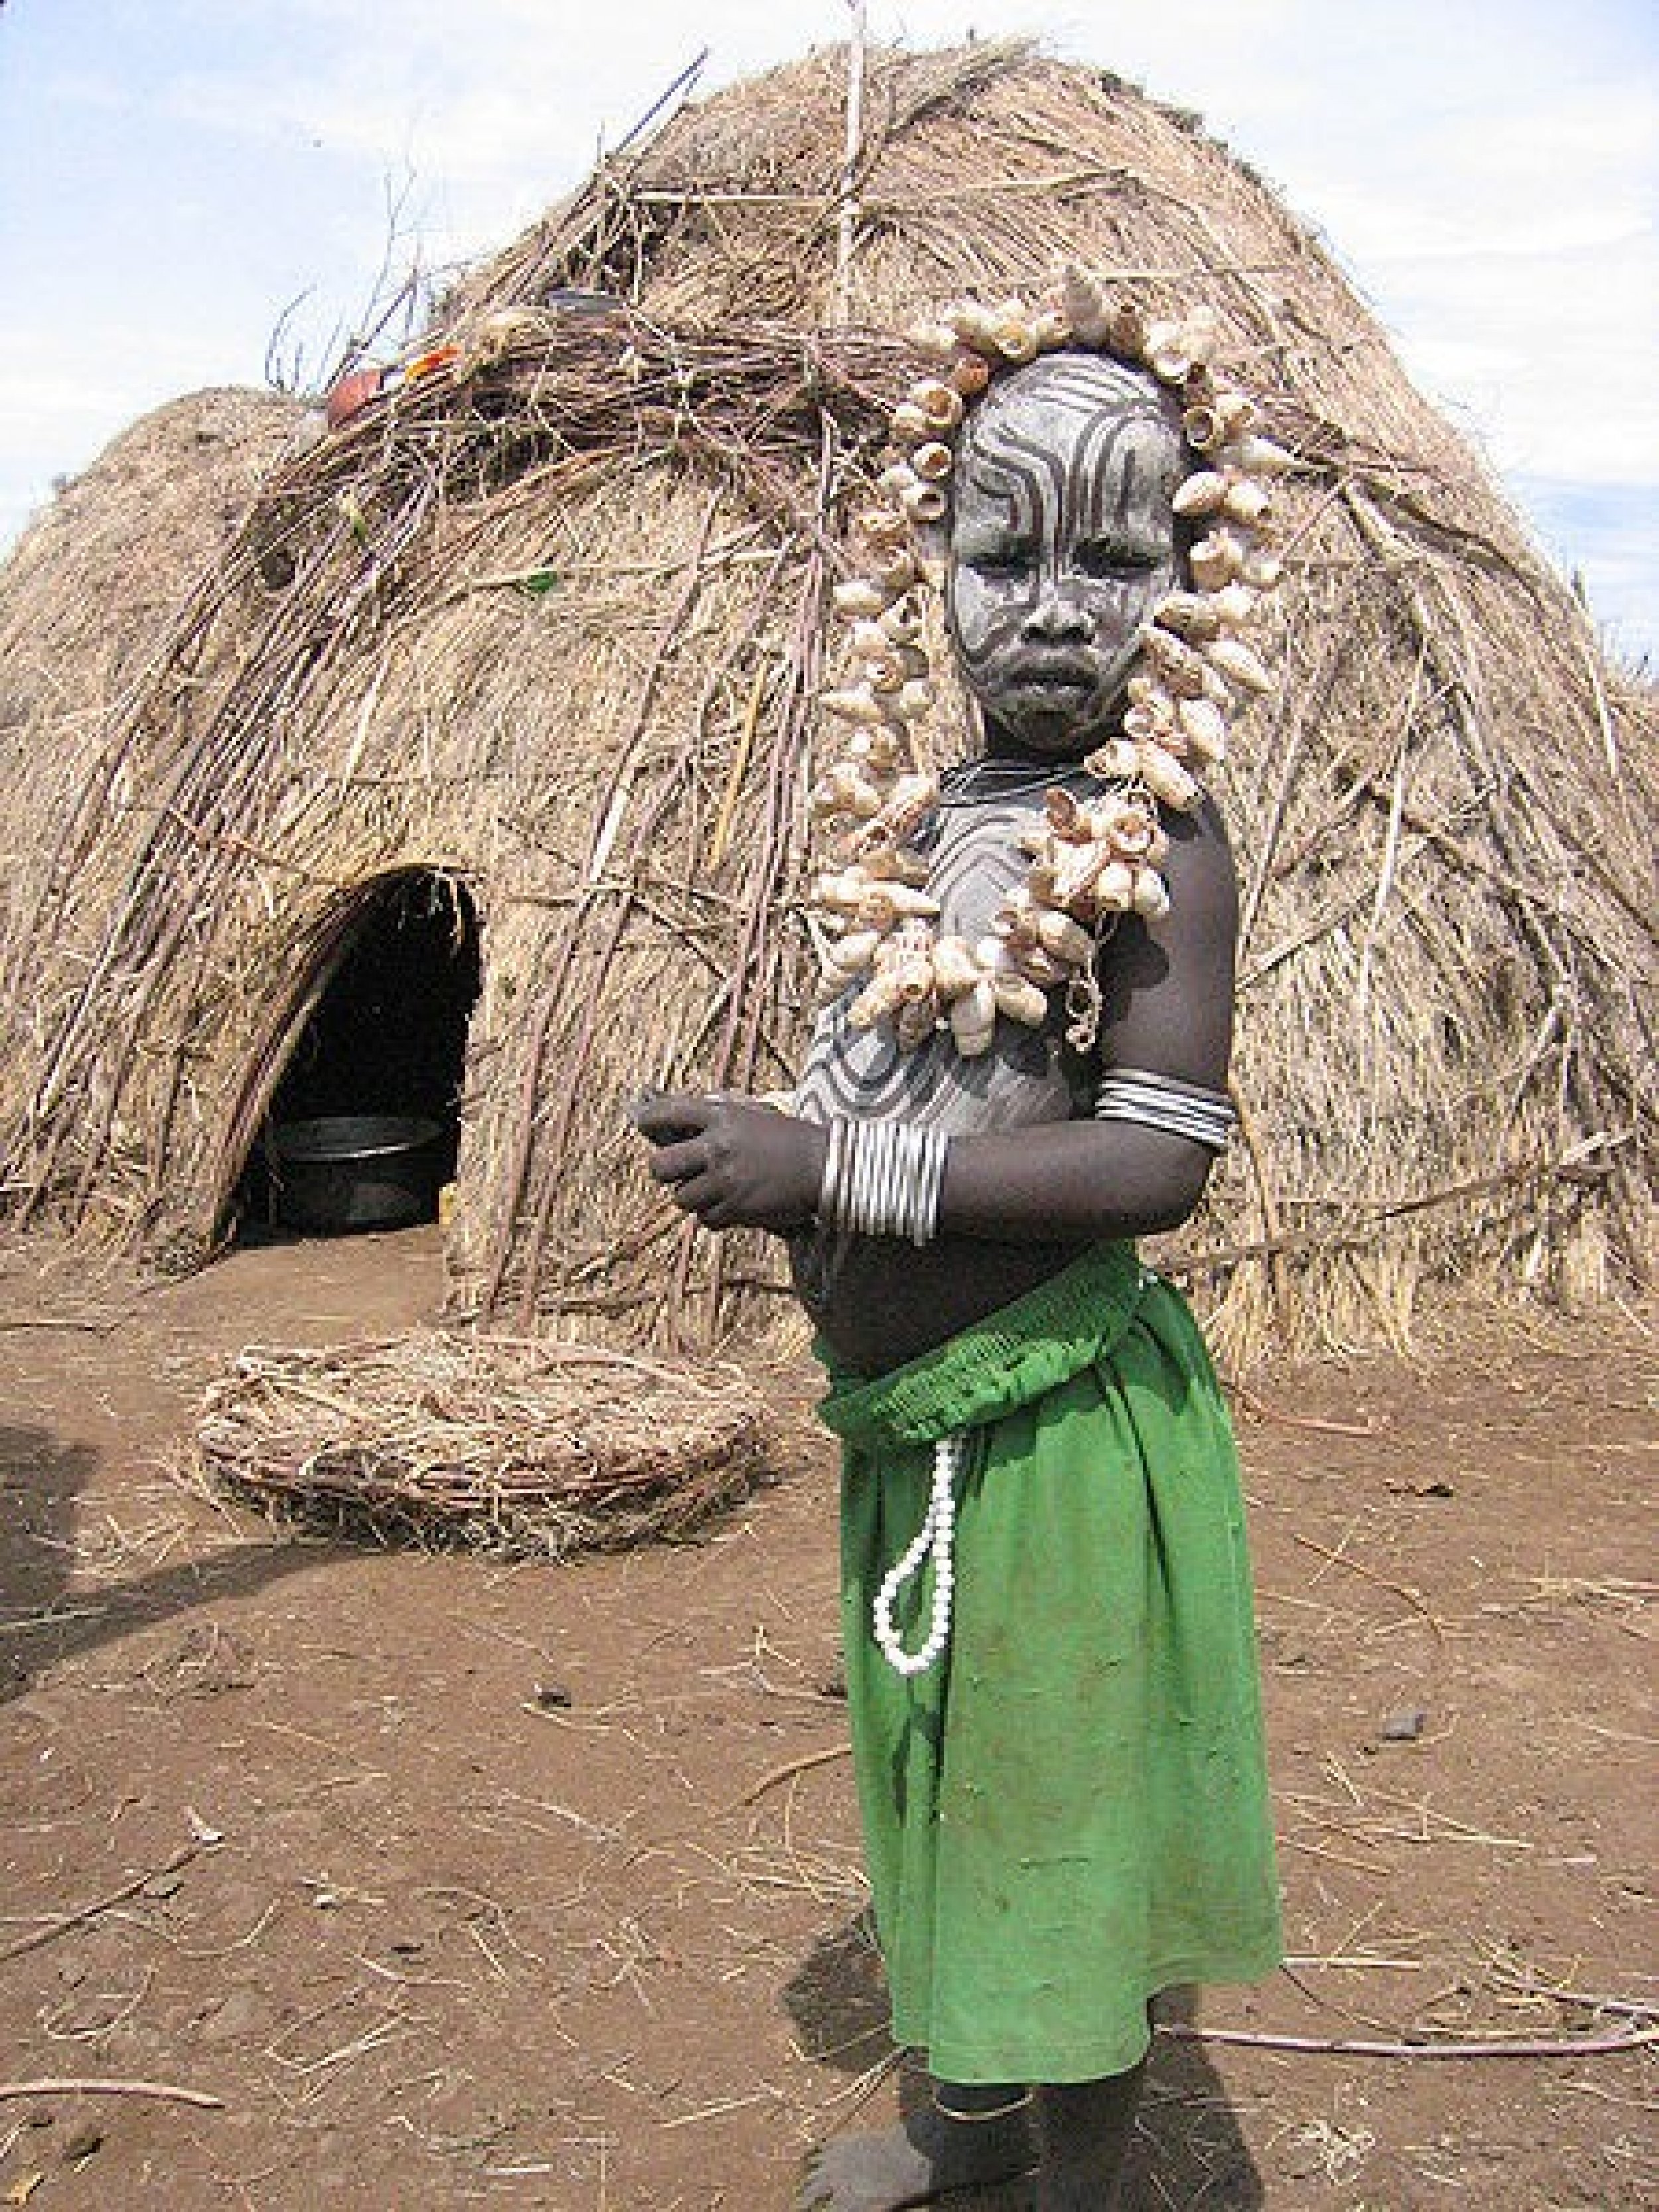 Omo Valley Tribes